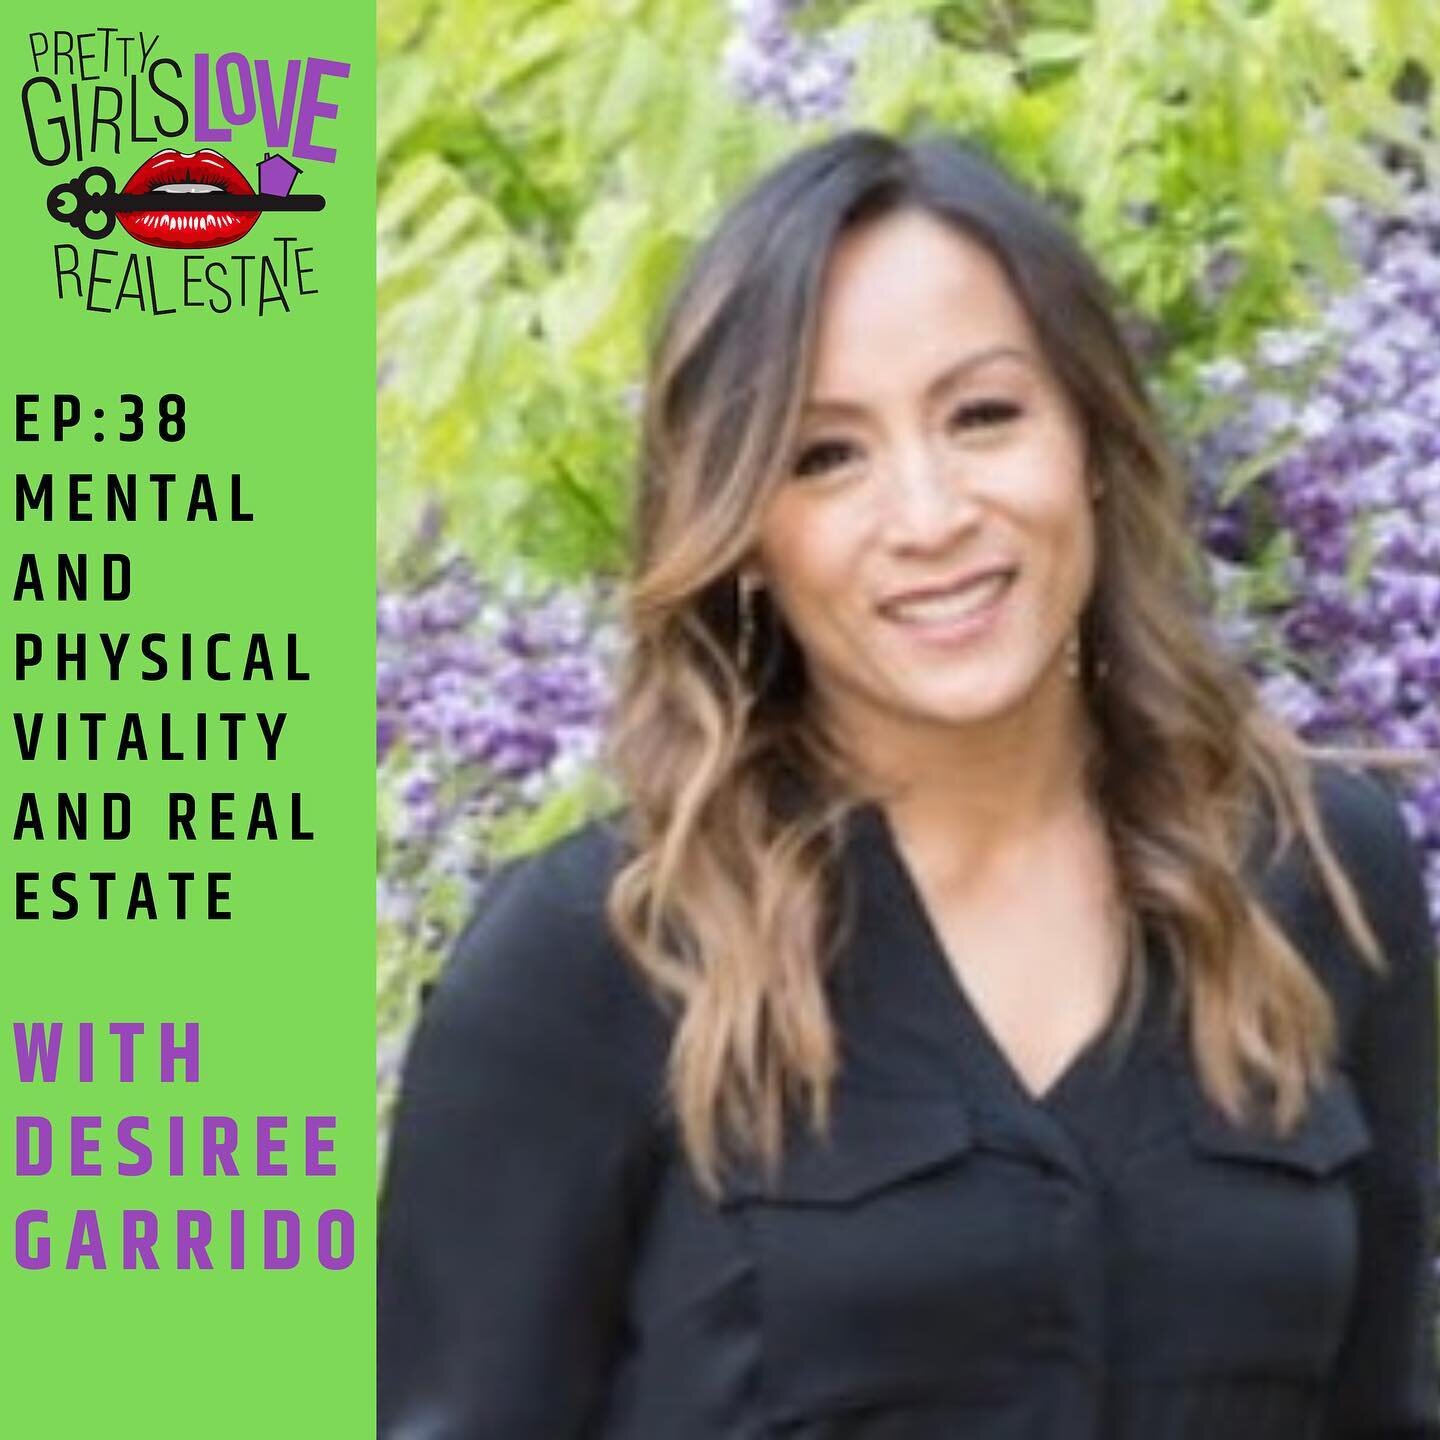 On episode 38 of @prettygirlsloverealestate, I chat with @desireegarridorealtor, realtor at Compass and life/professional coach in the Bay Area. During our chat we discuss:

- Markets in Northern California that are not totally saturated
- Importance